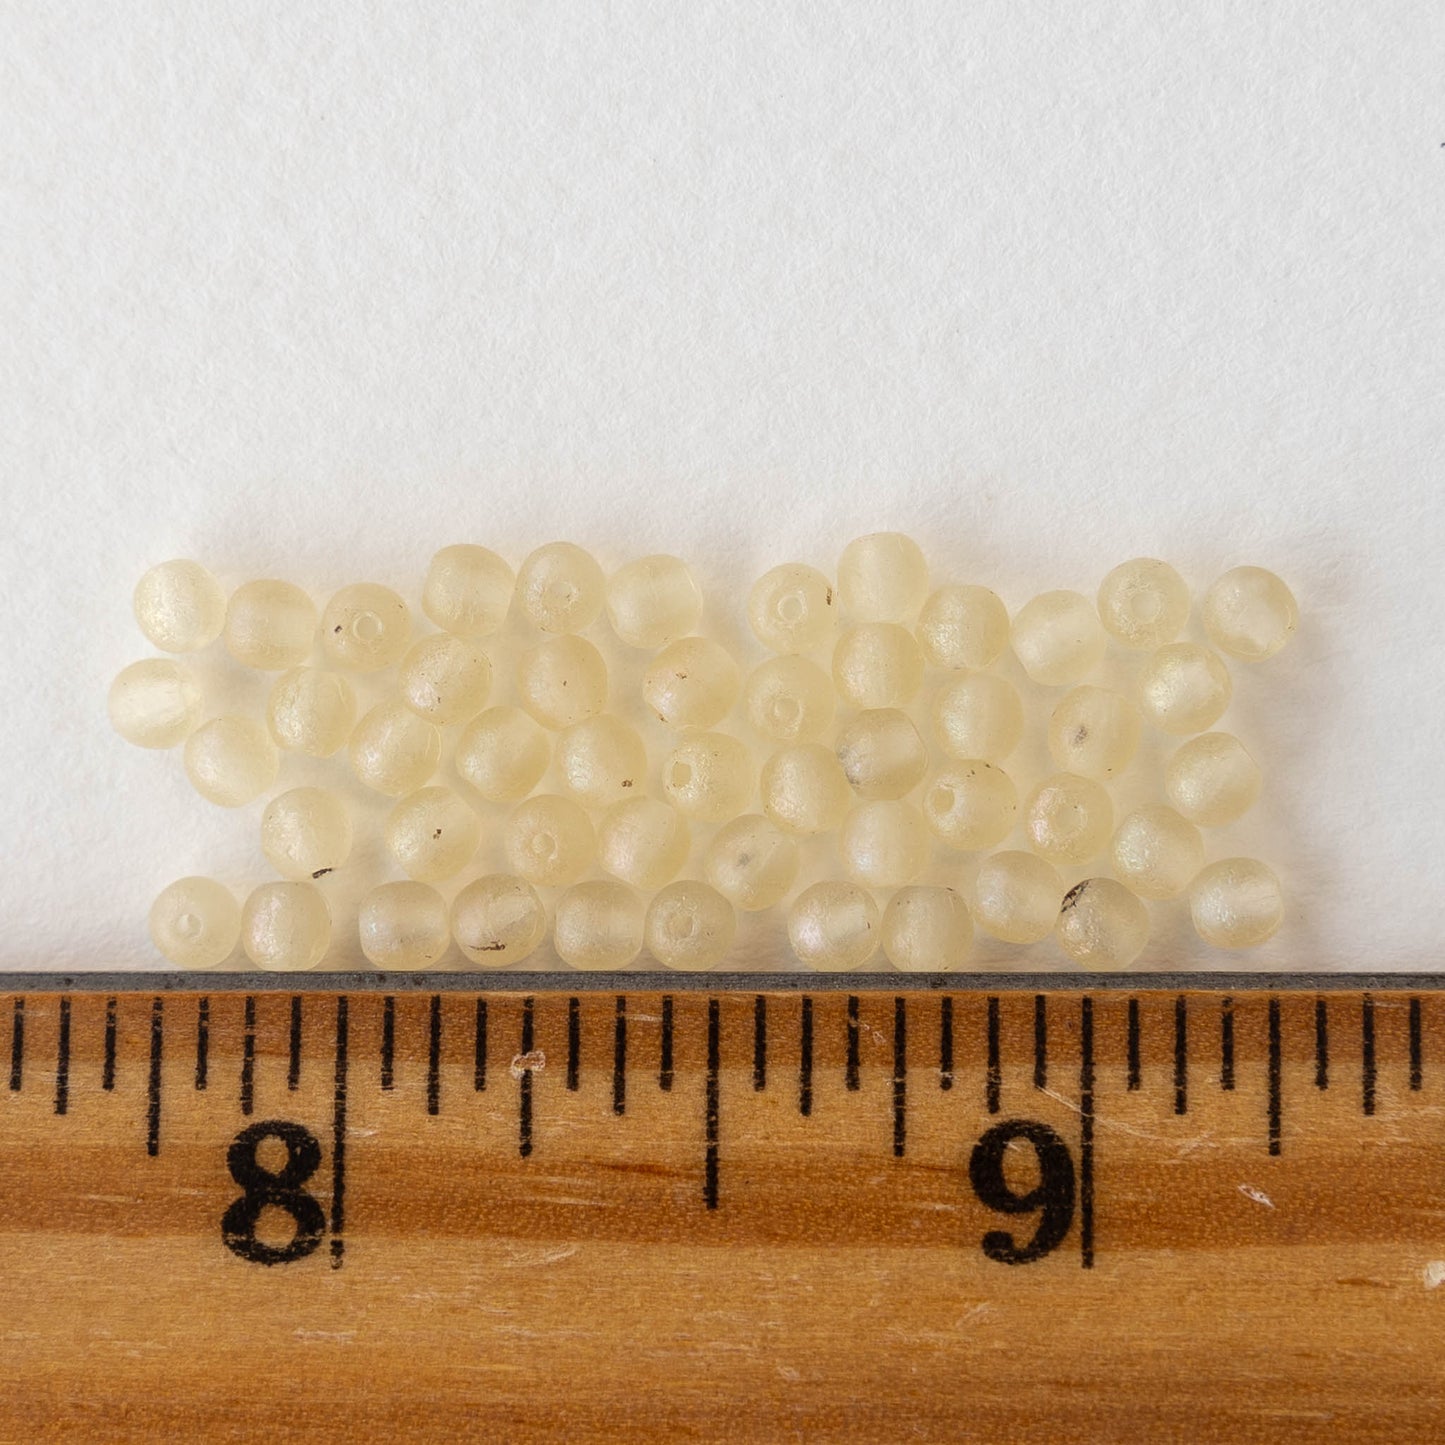 3mm Round Glass Beads - Etched Champagne - 50 Beads